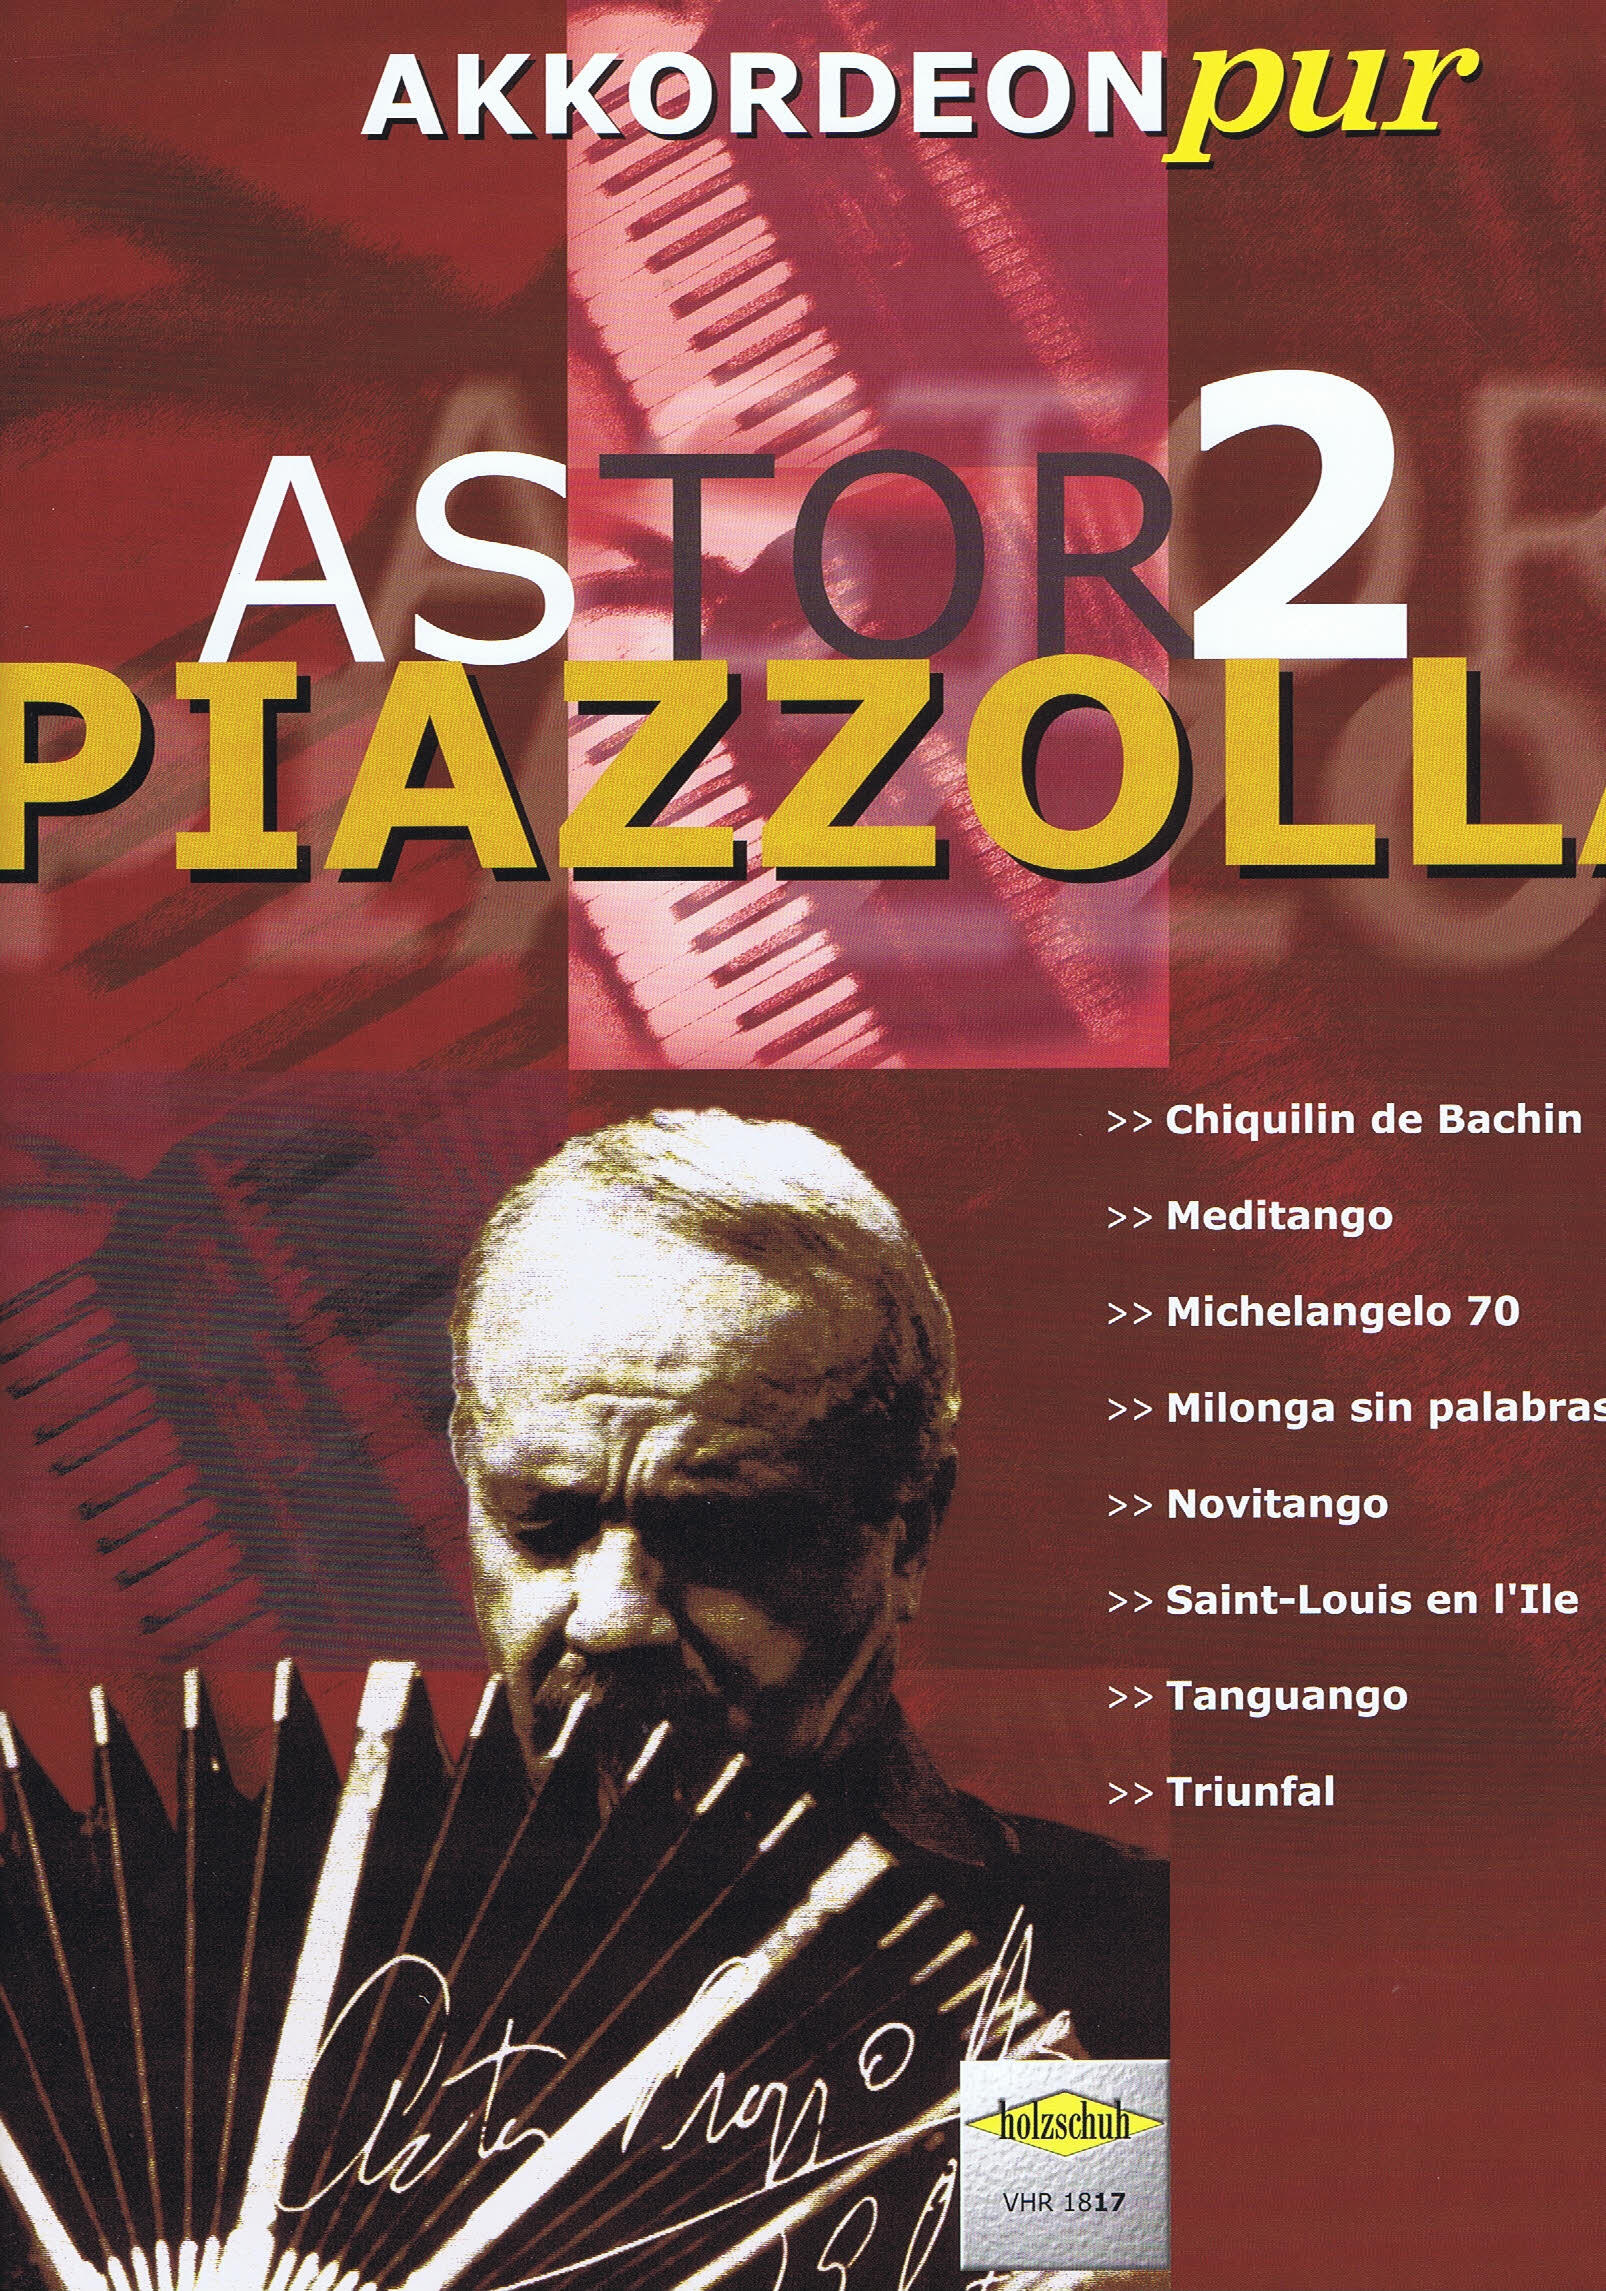 Astor Piazzolla 2 : photo 1